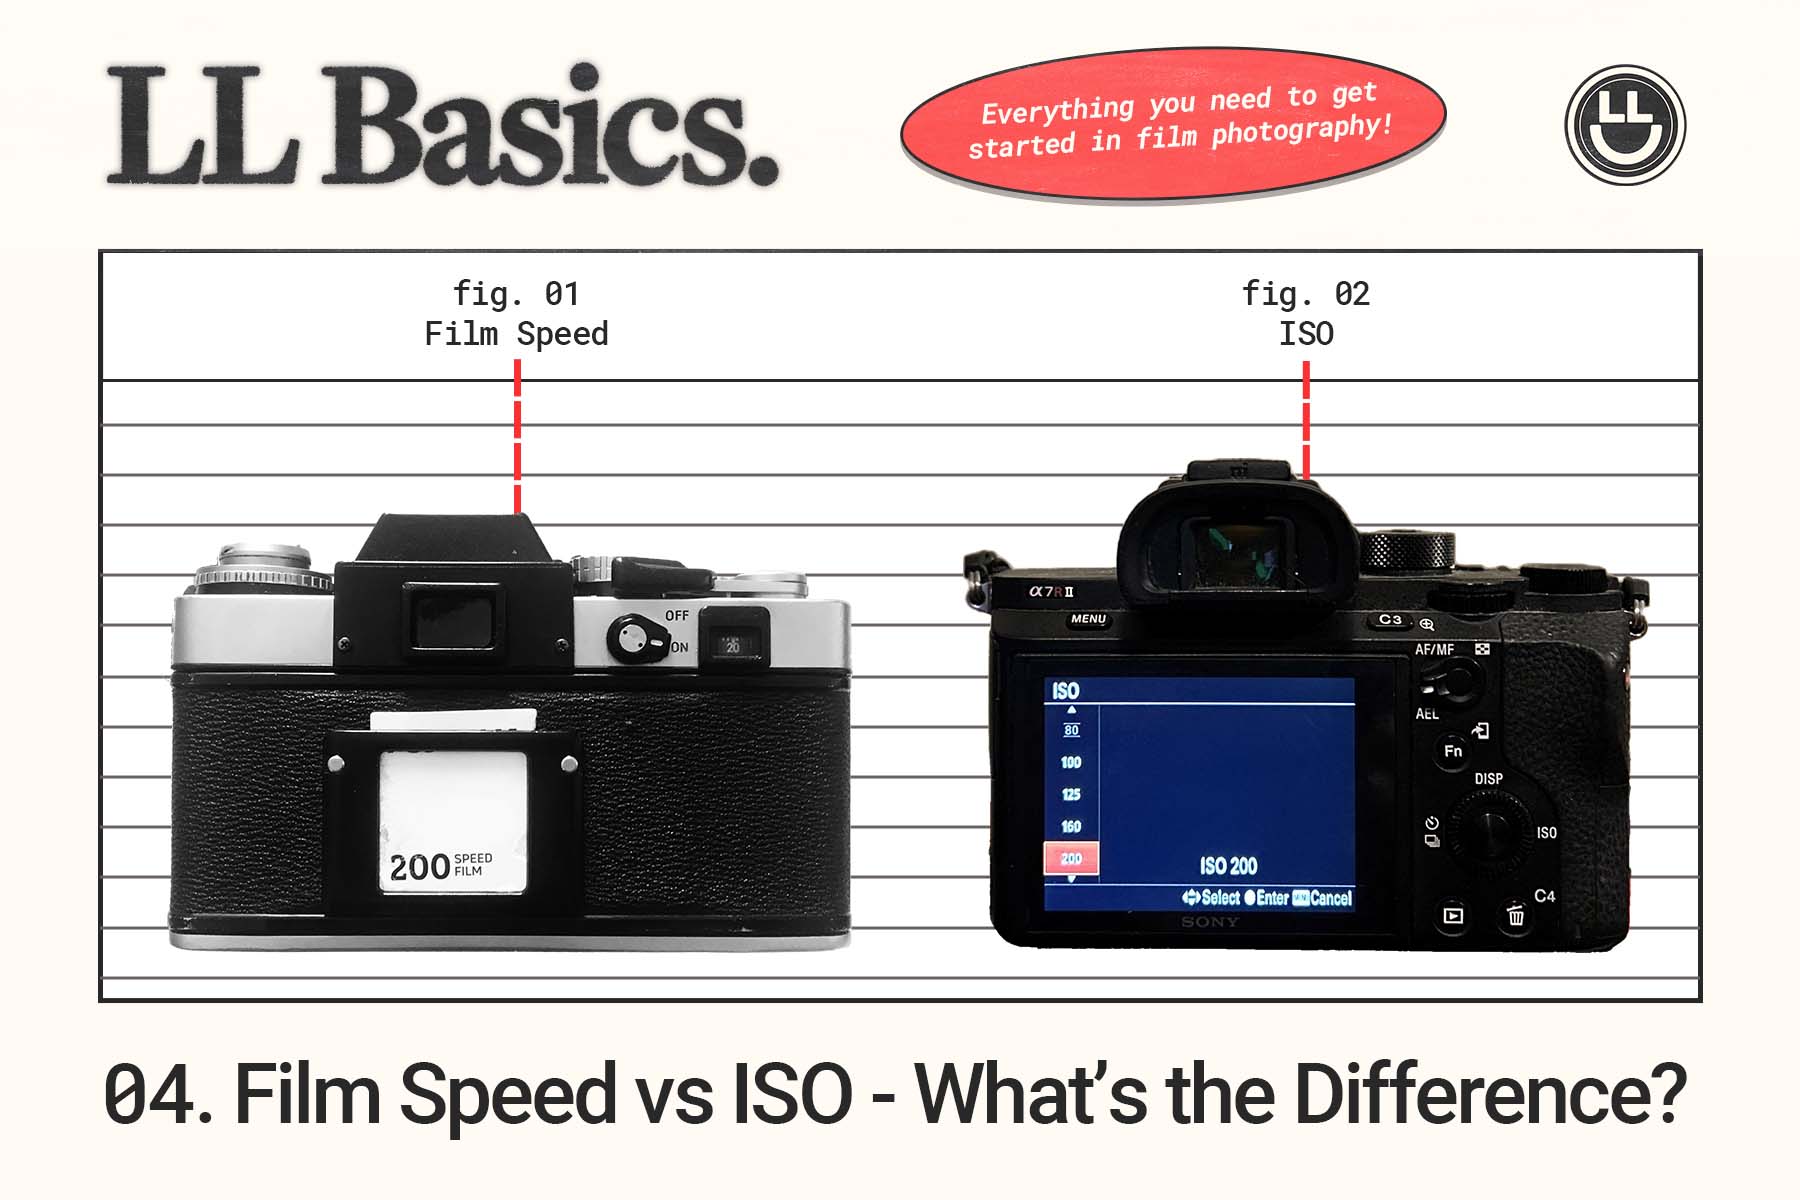 What's the difference between Film Speed and ISO?